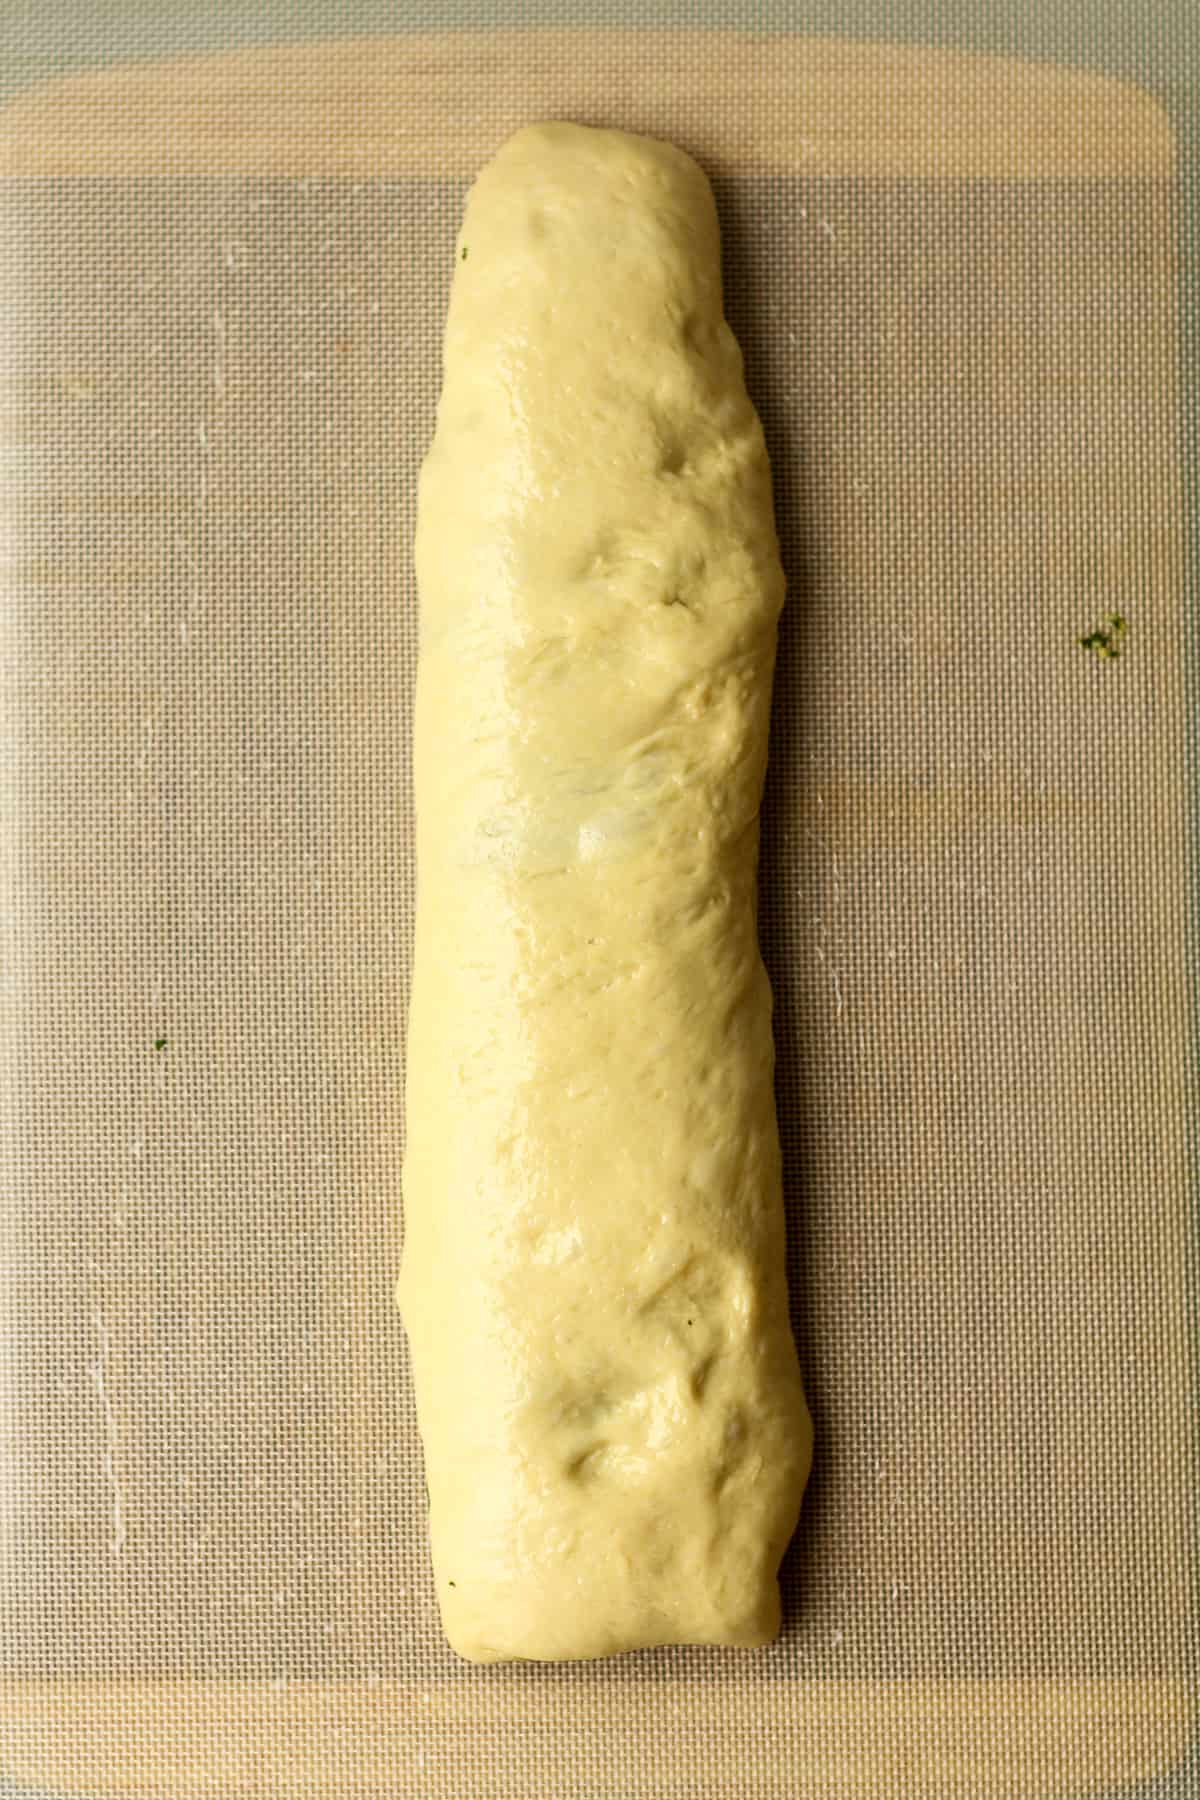 The long roll of bread dough.